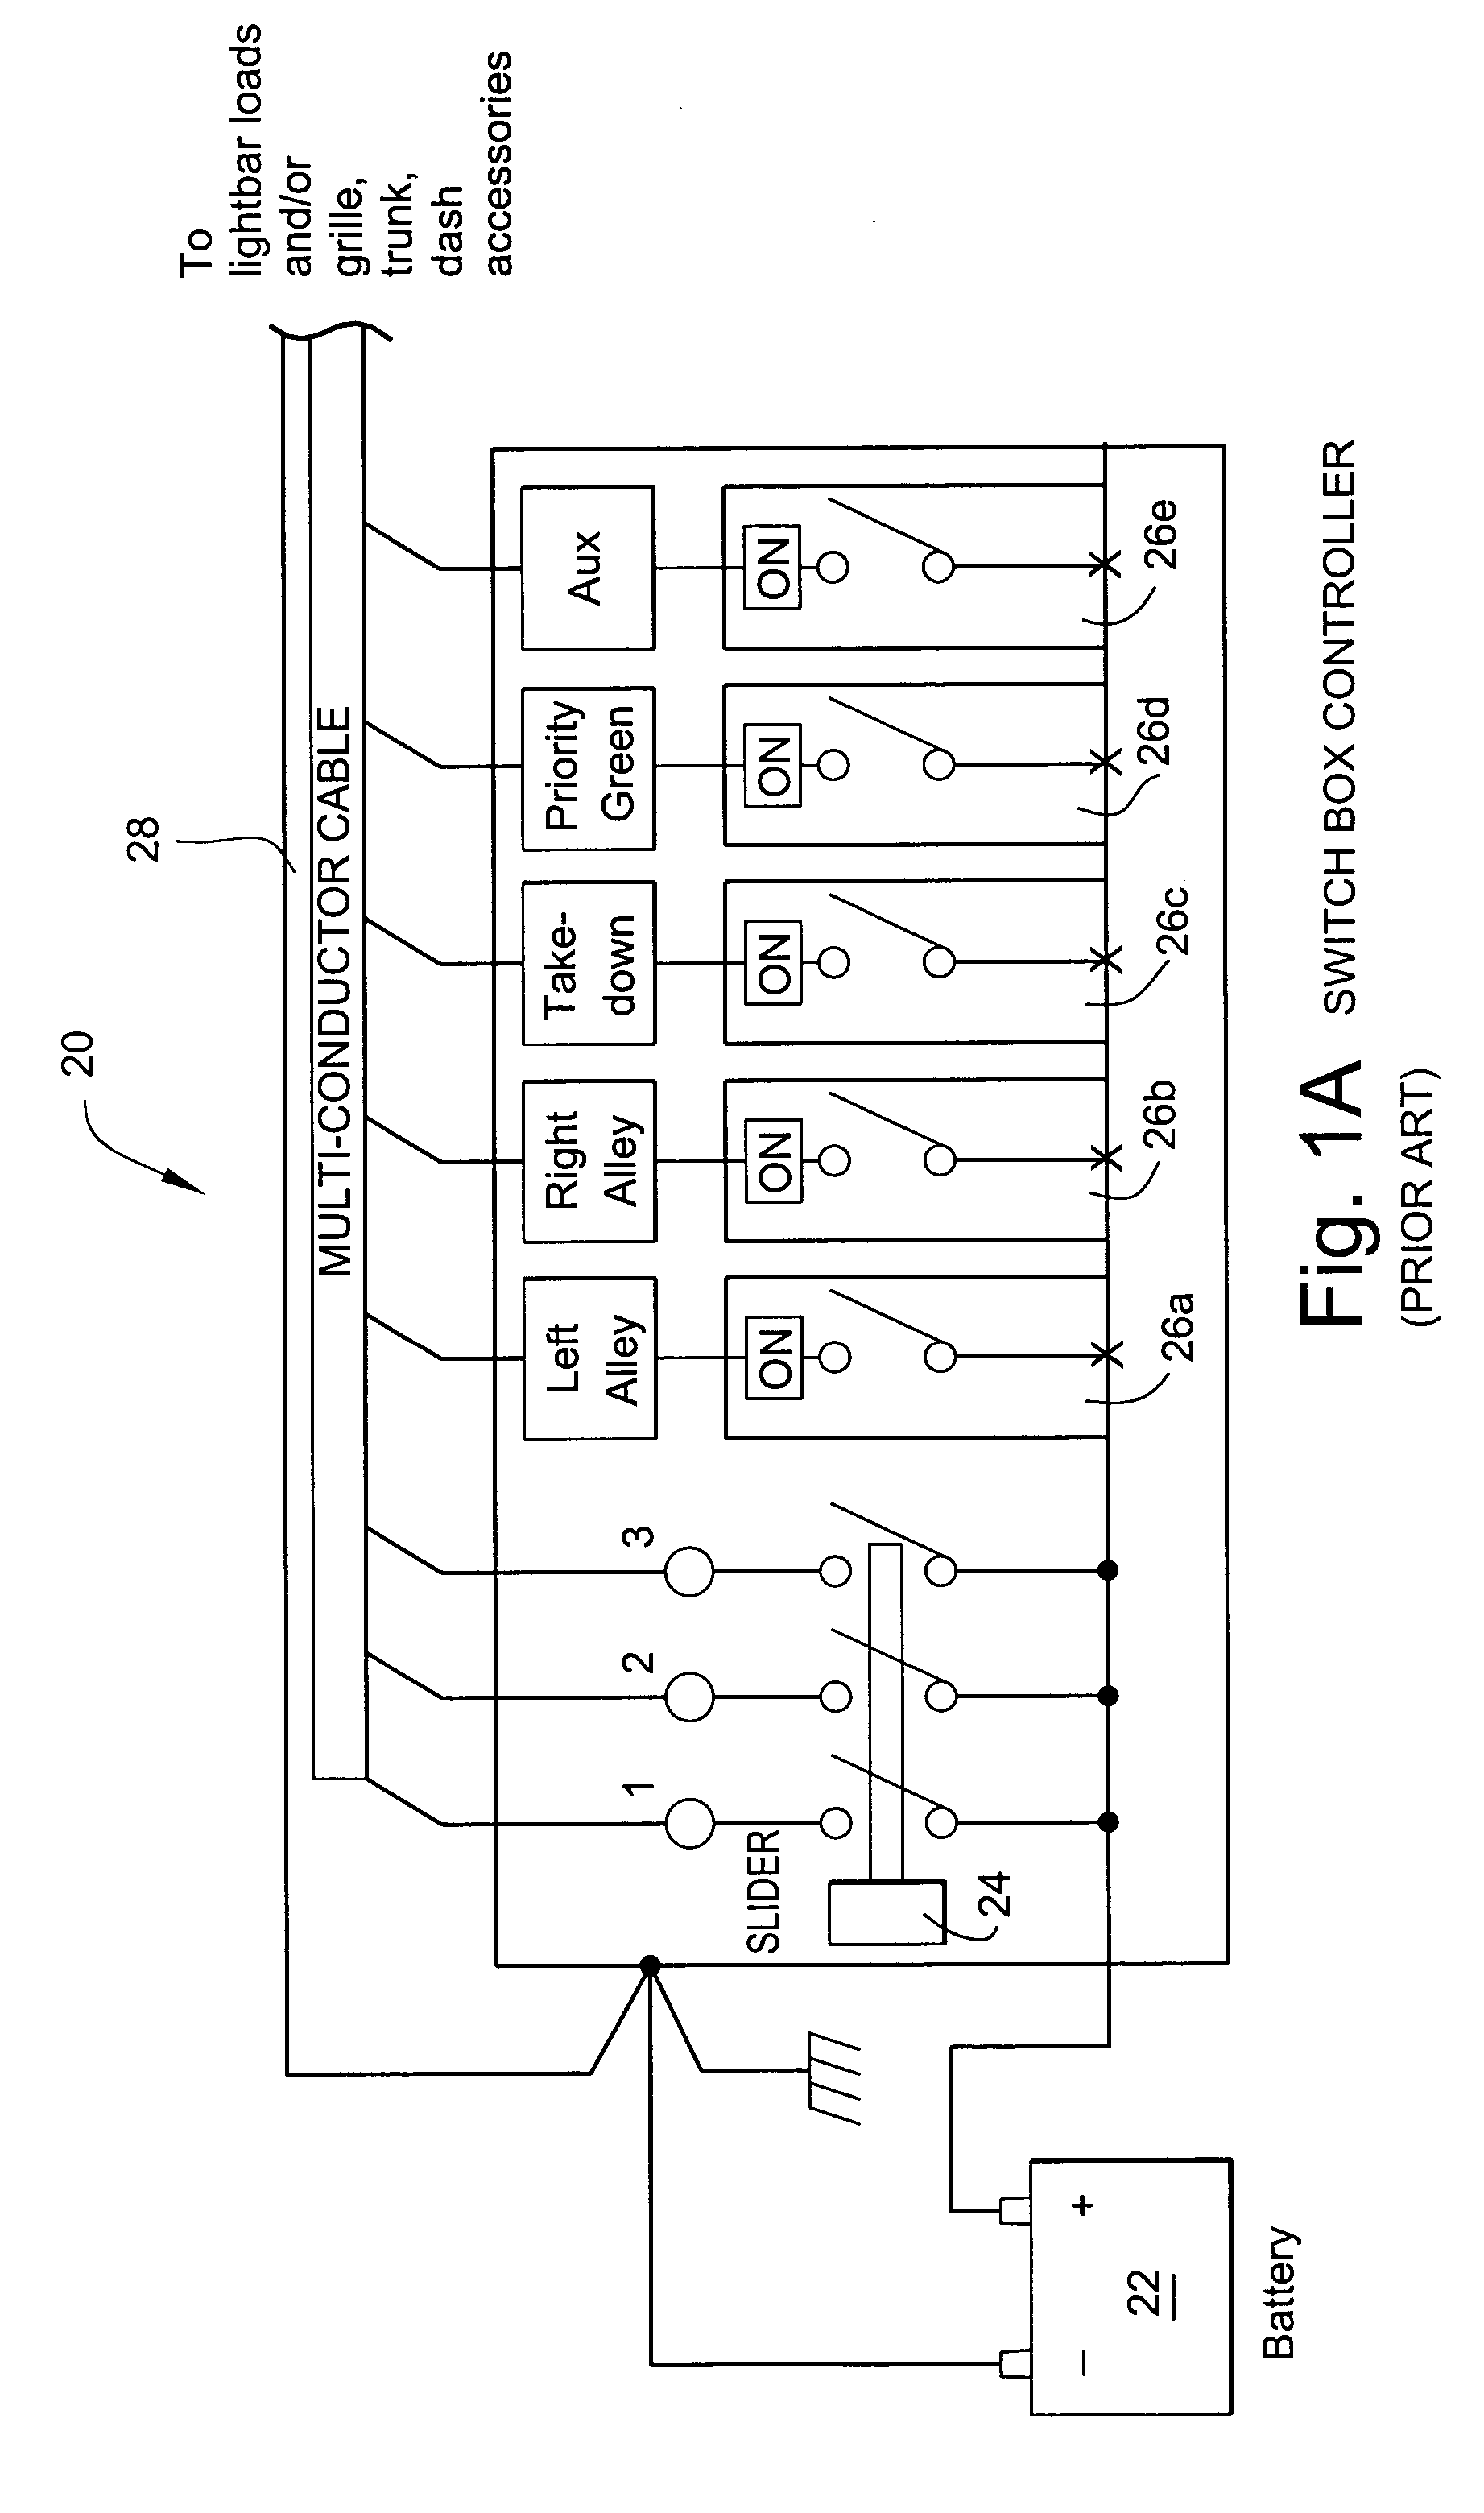 Method and apparatus for communicating control and other information over a power bus